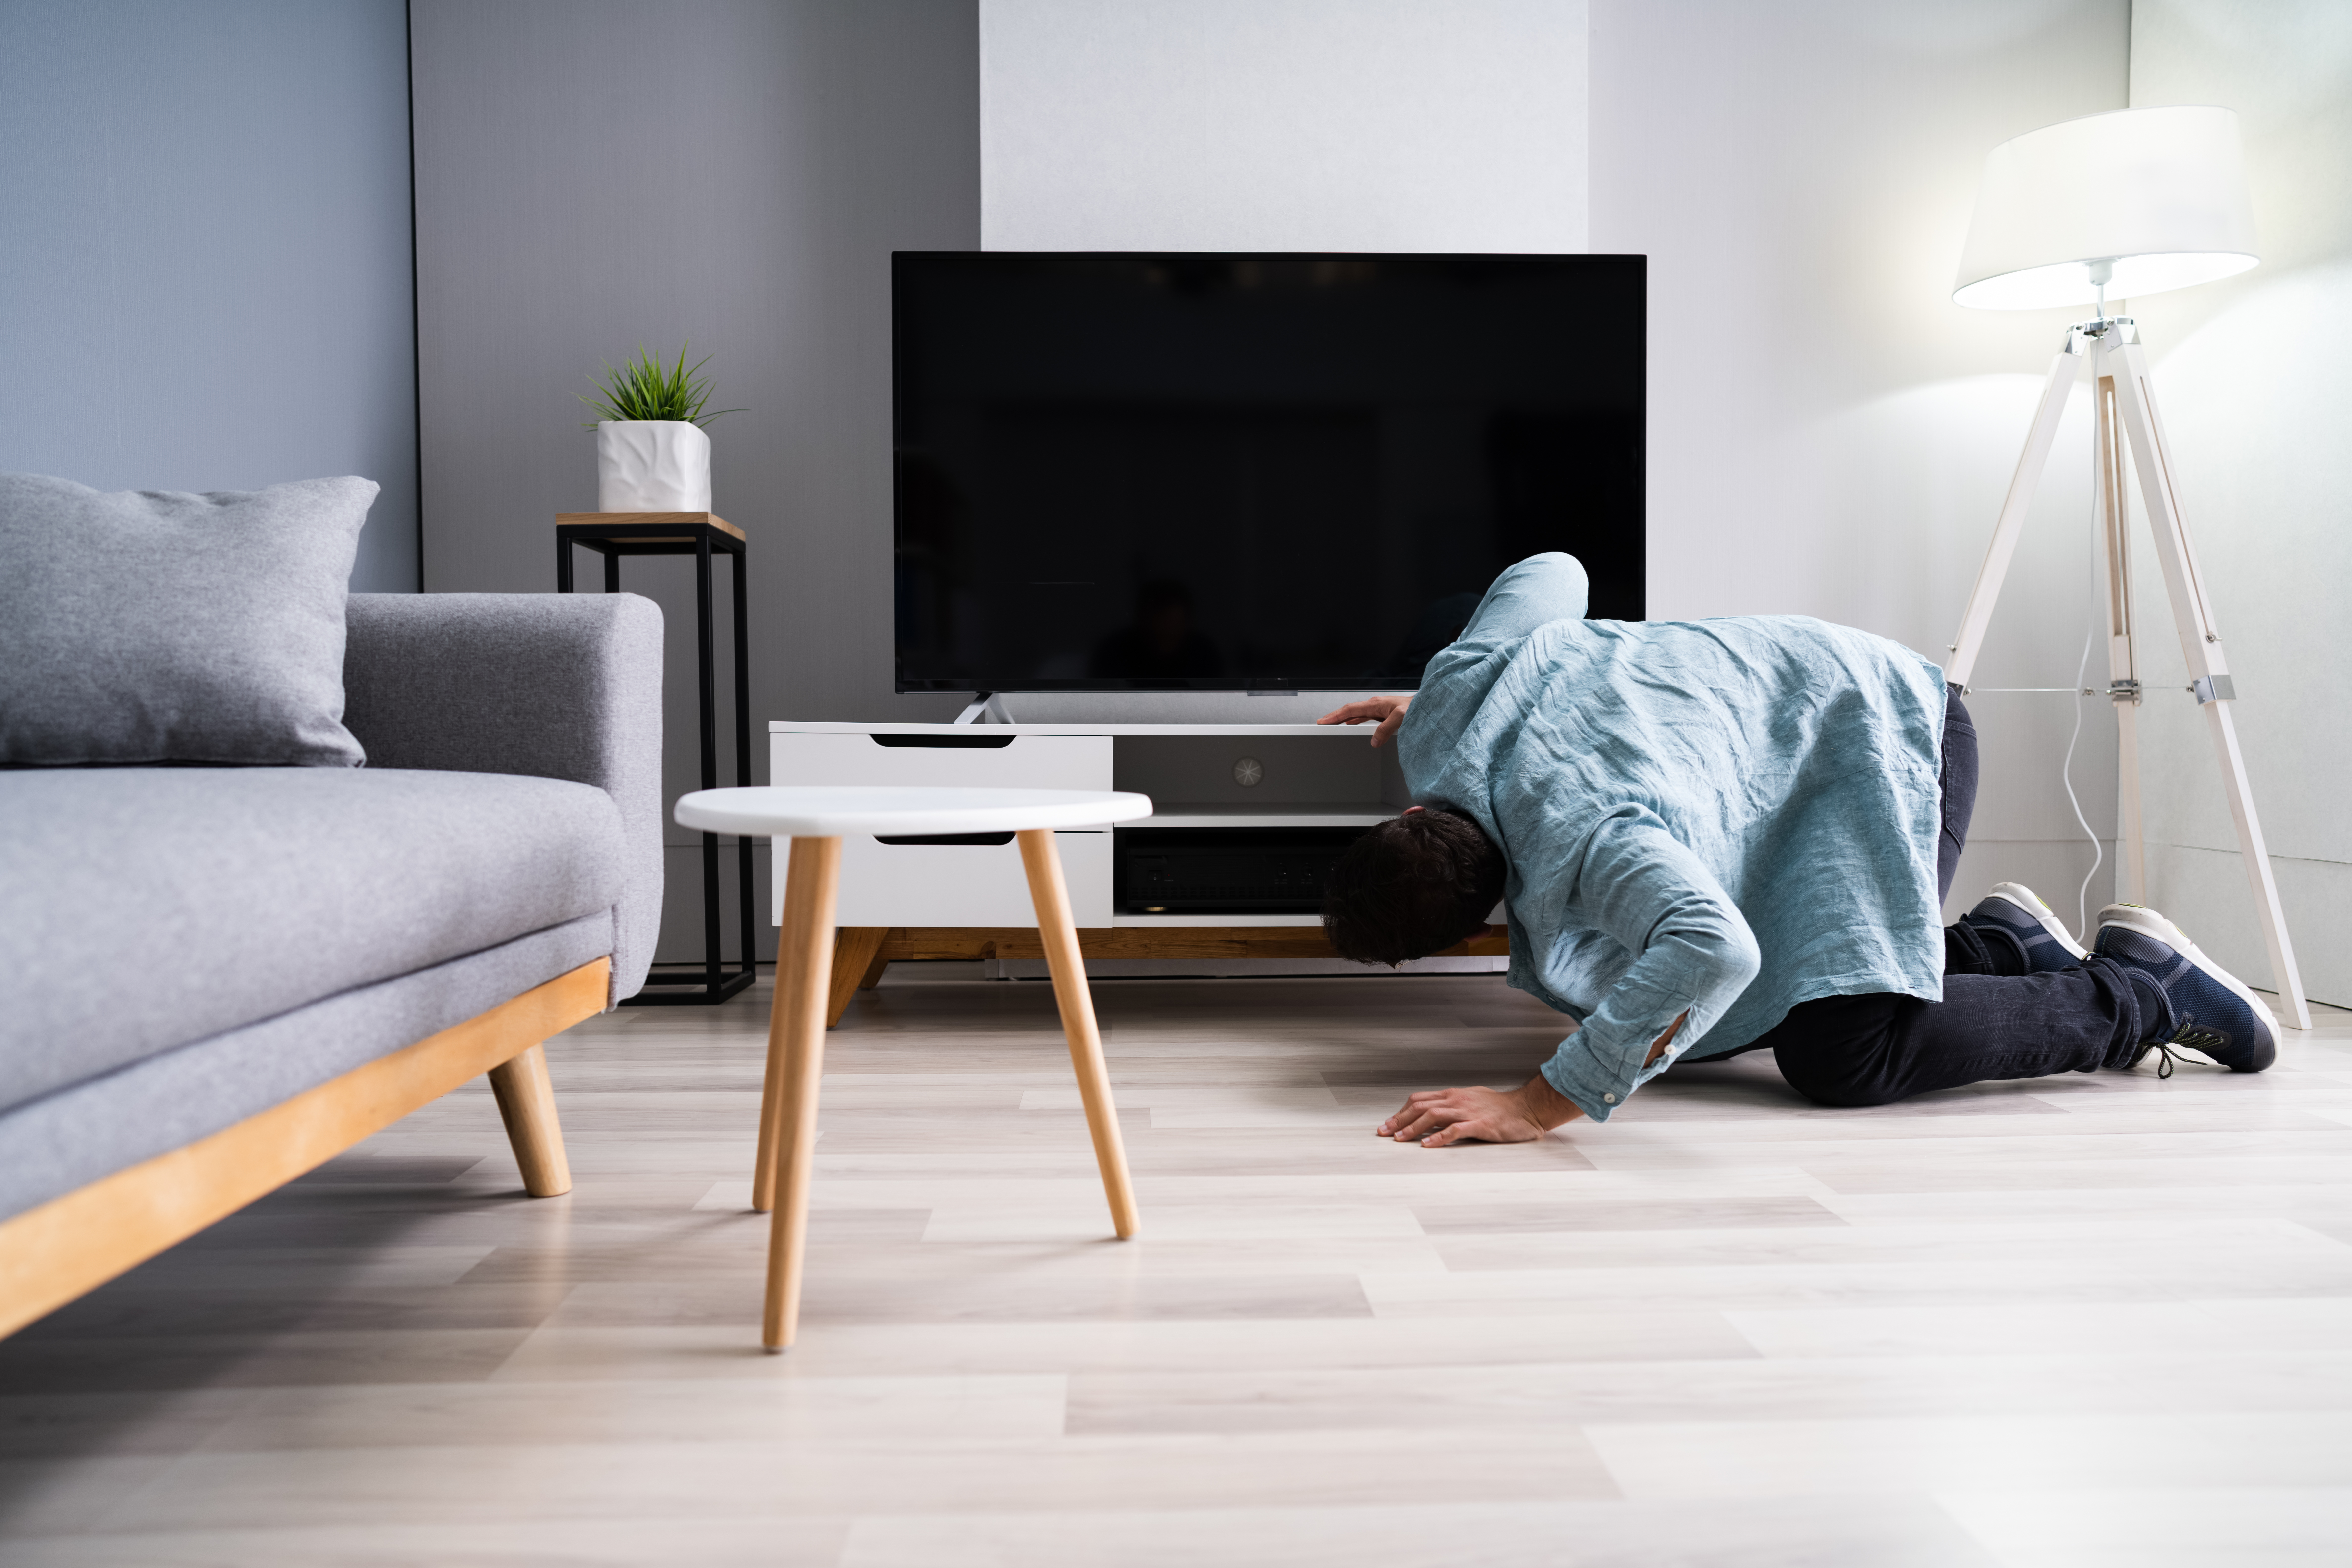 Man is looking for lost things under the sofa and table | Source: Shutterstock.com